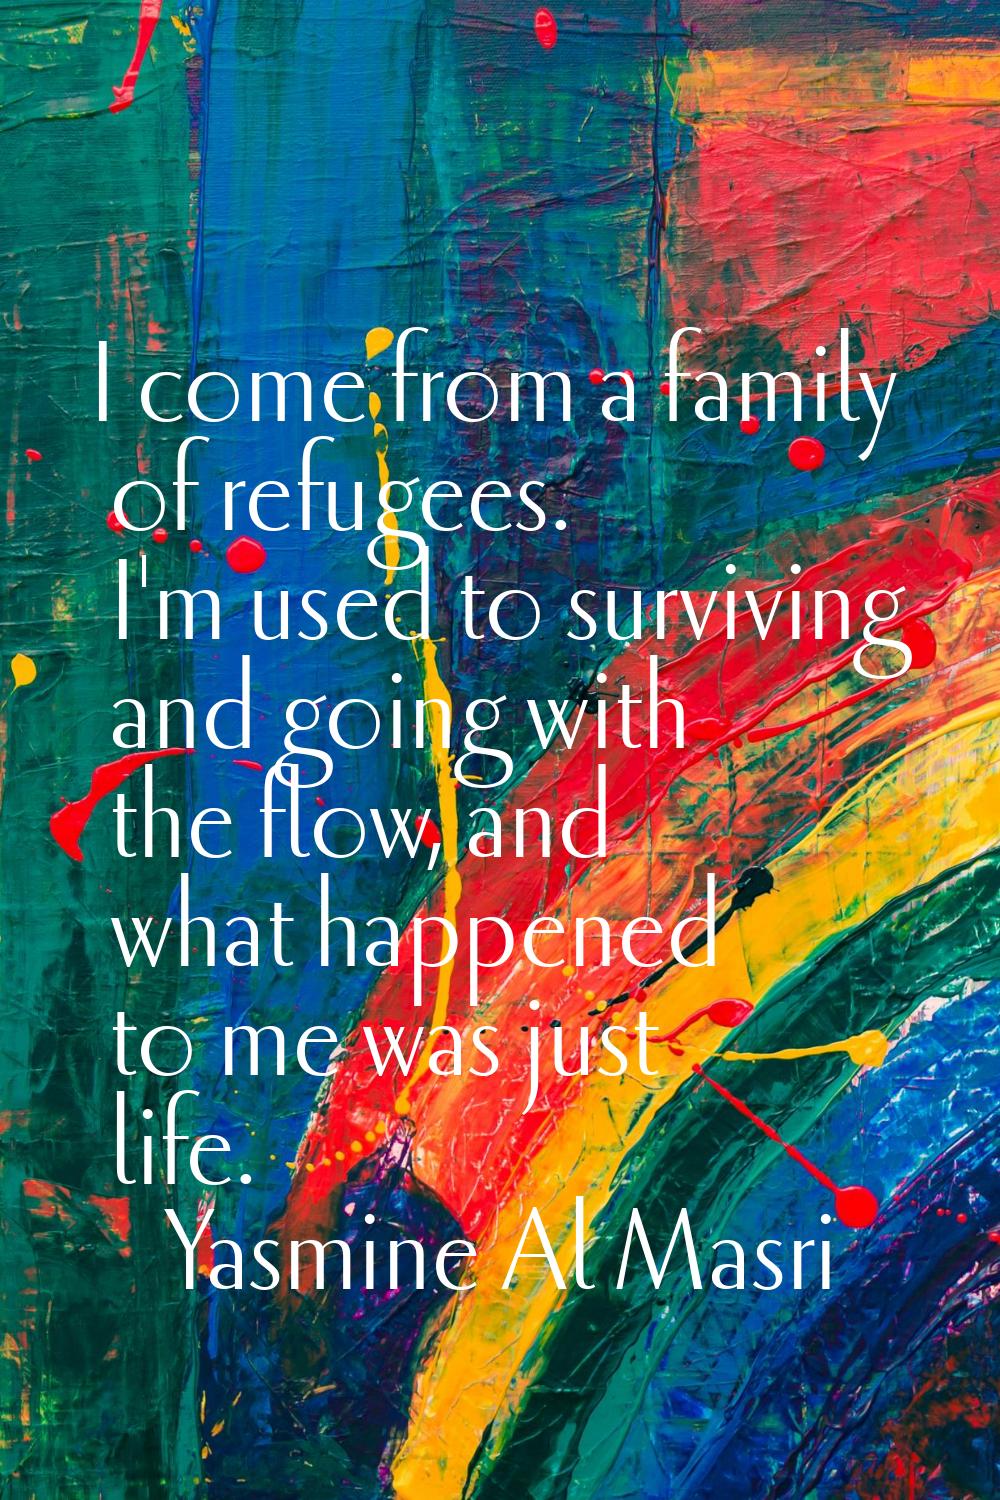 I come from a family of refugees. I'm used to surviving and going with the flow, and what happened 